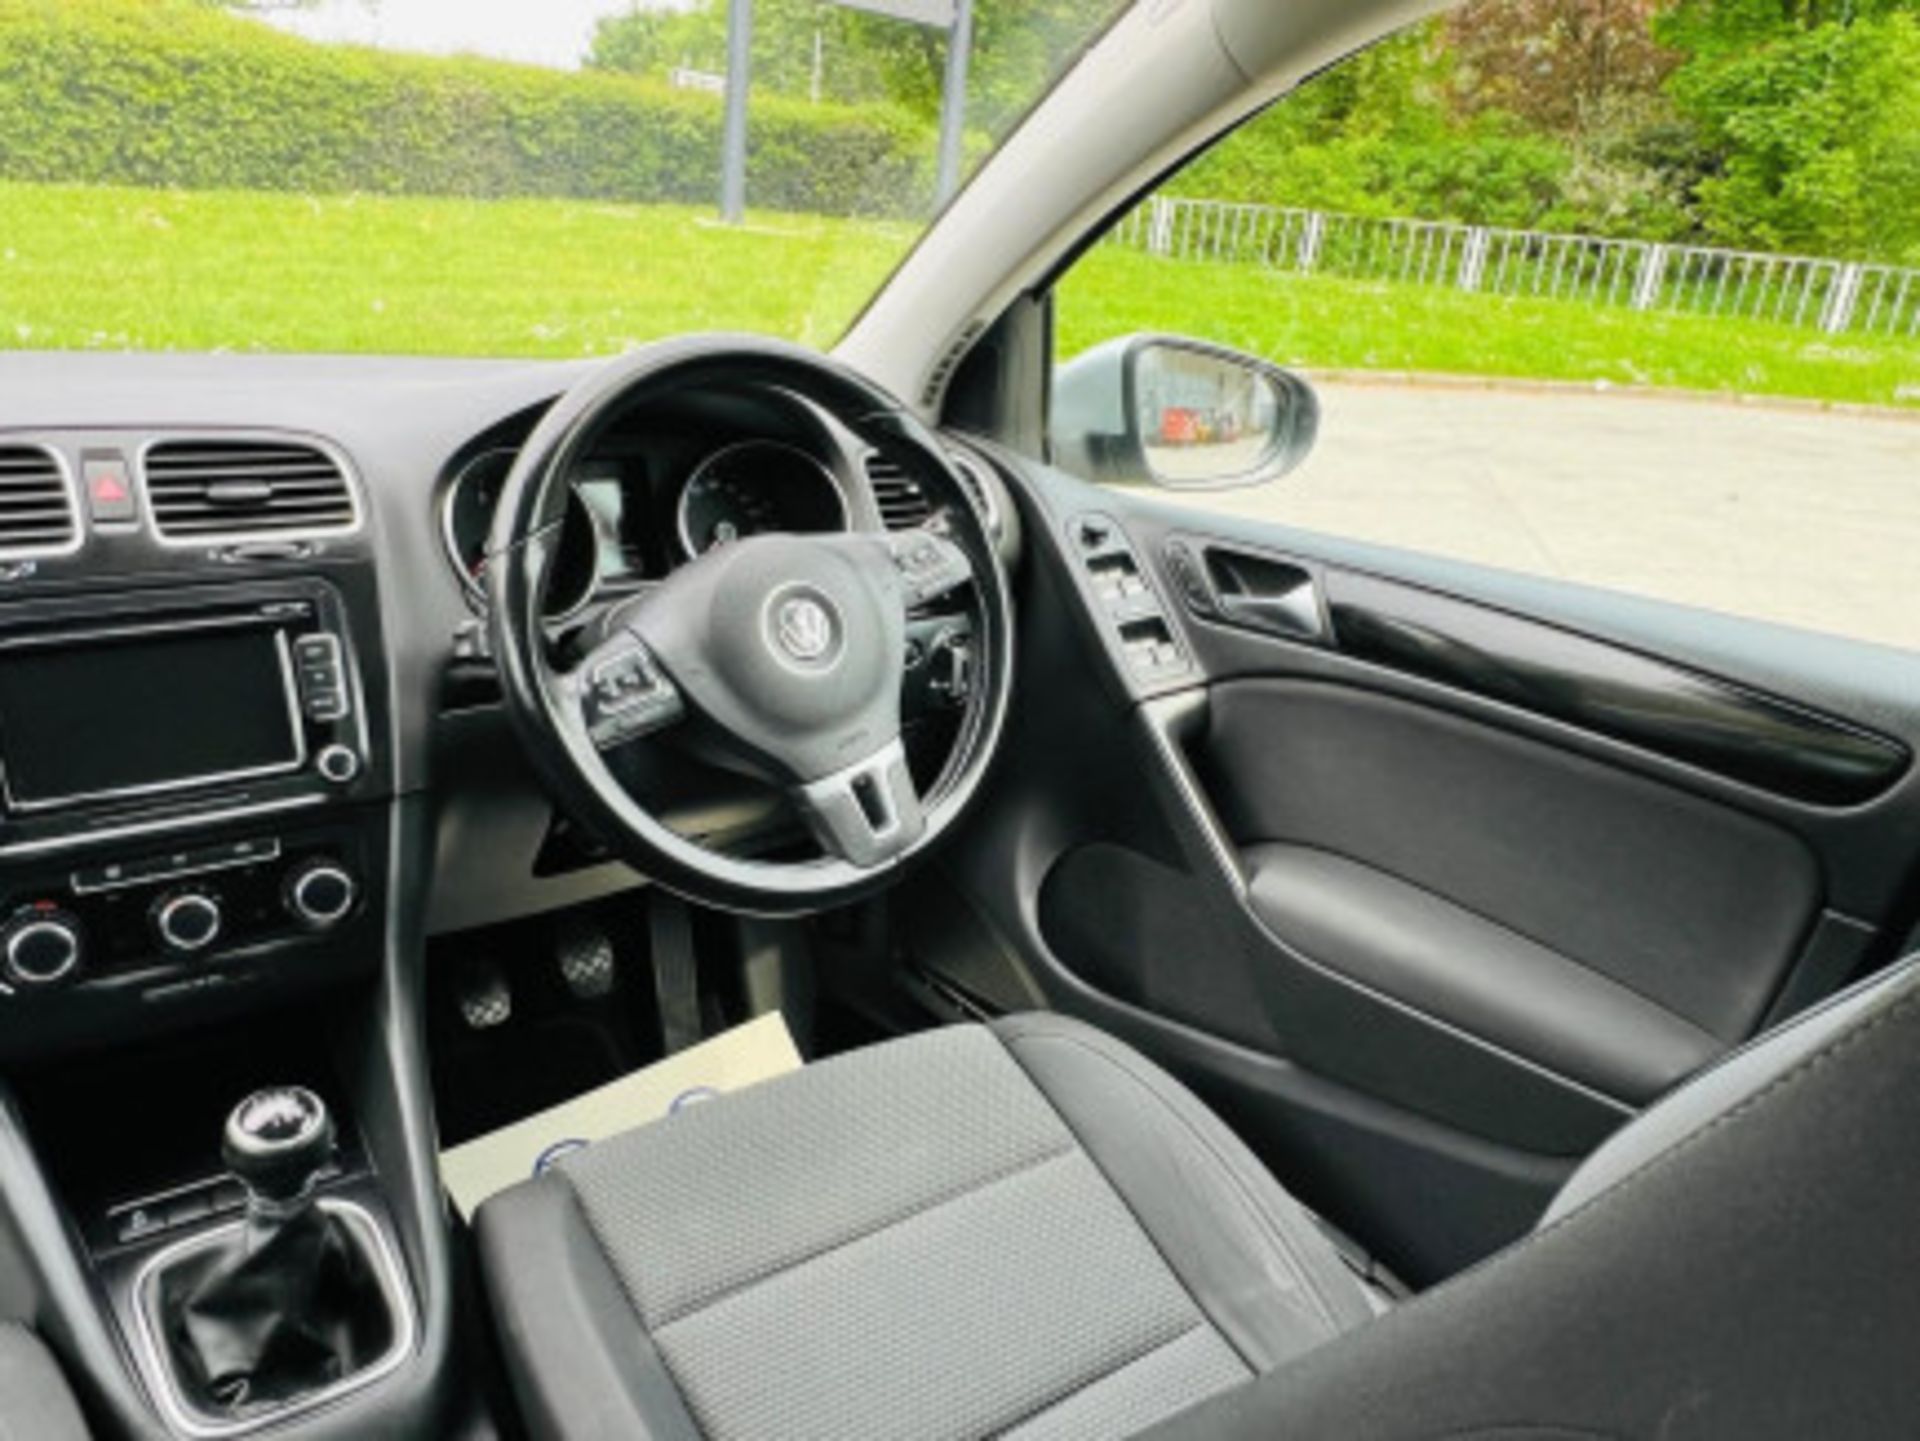 IMPECCABLE 2012 VOLKSWAGEN GOLF 1.6 TDI MATCH >>--NO VAT ON HAMMER--<< - Image 20 of 116